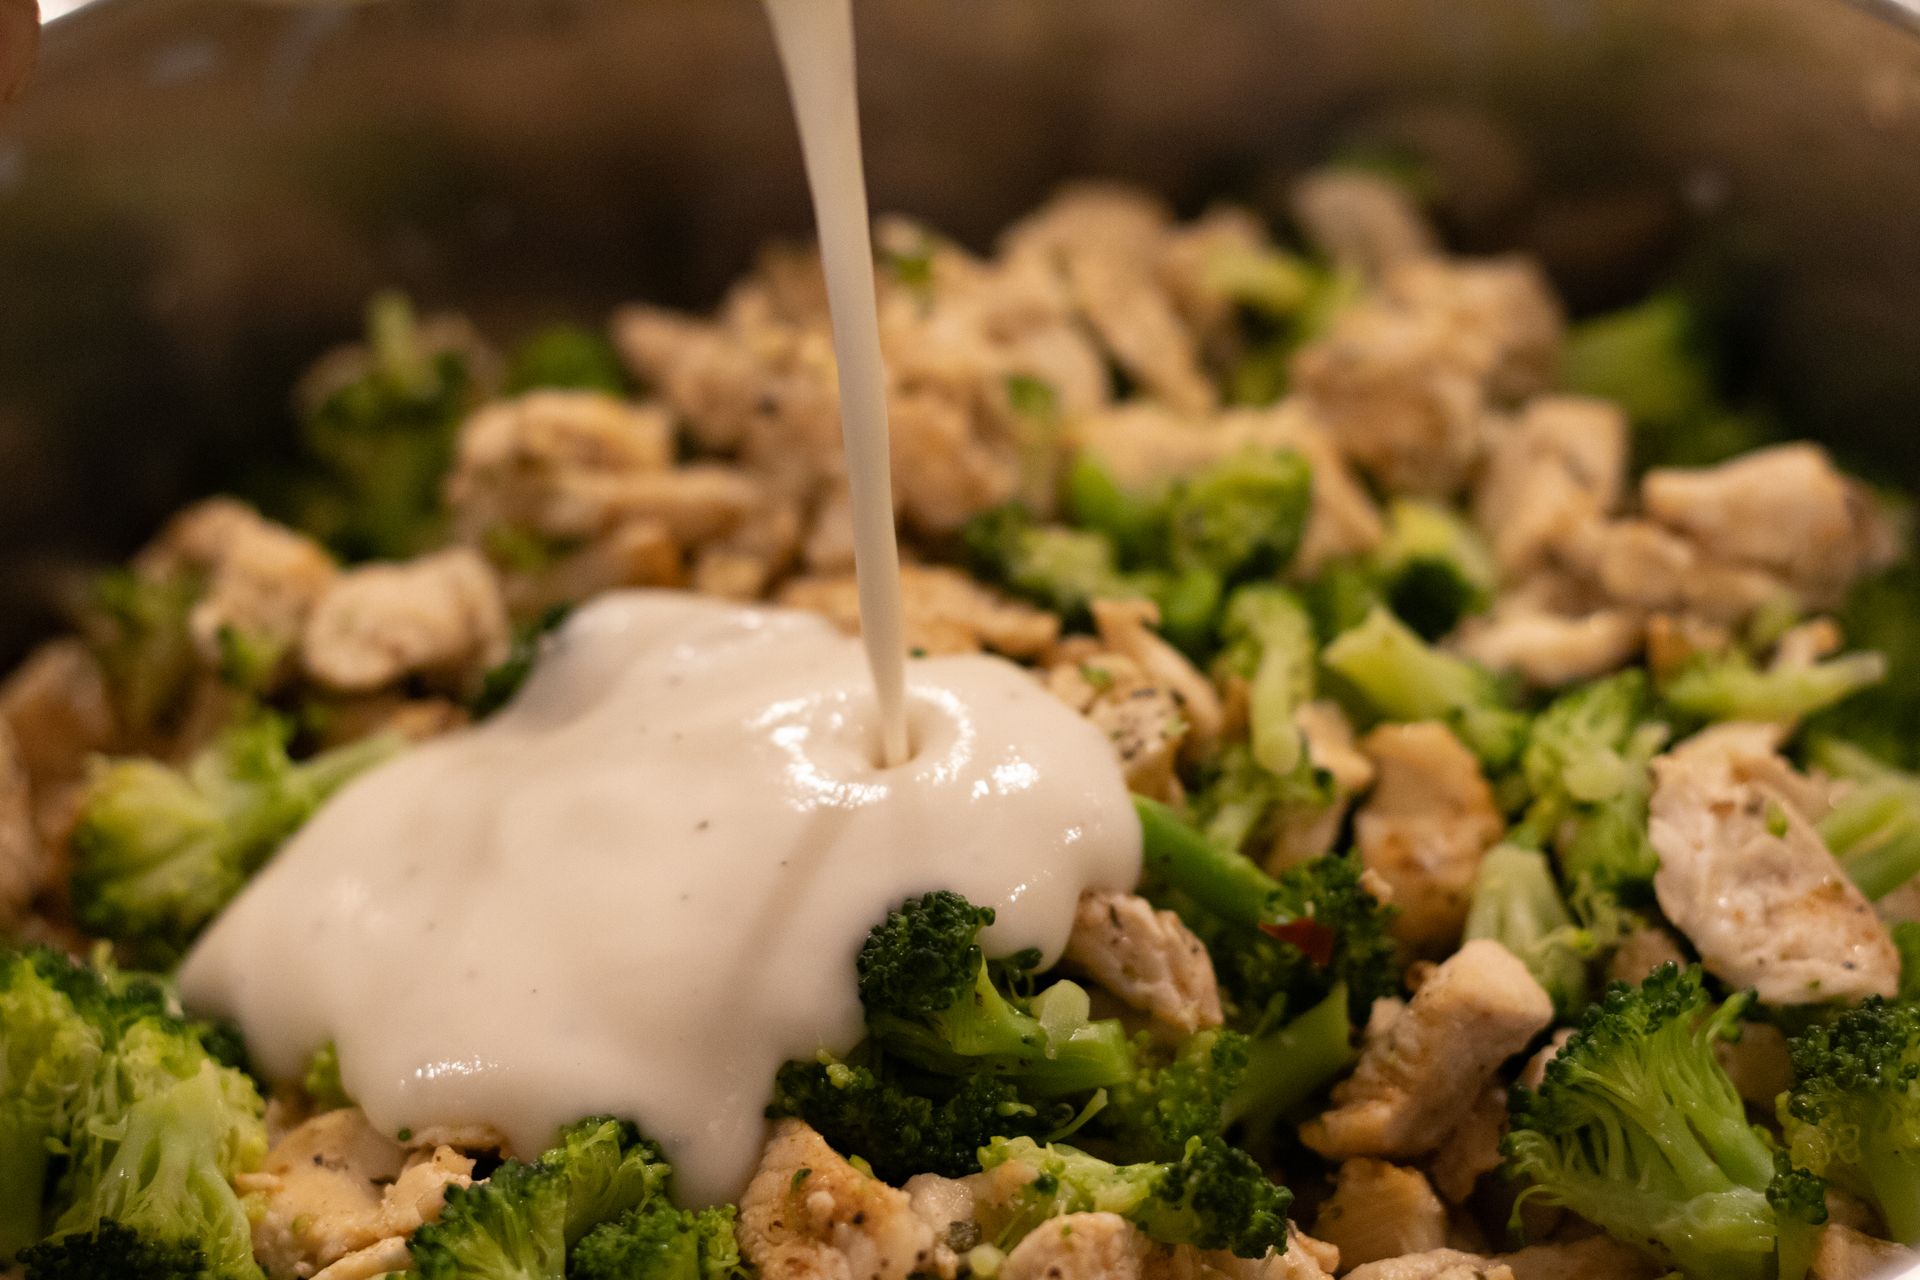 Alfredo sauce being poured into a pot filled with pasta, chicken, broccoli